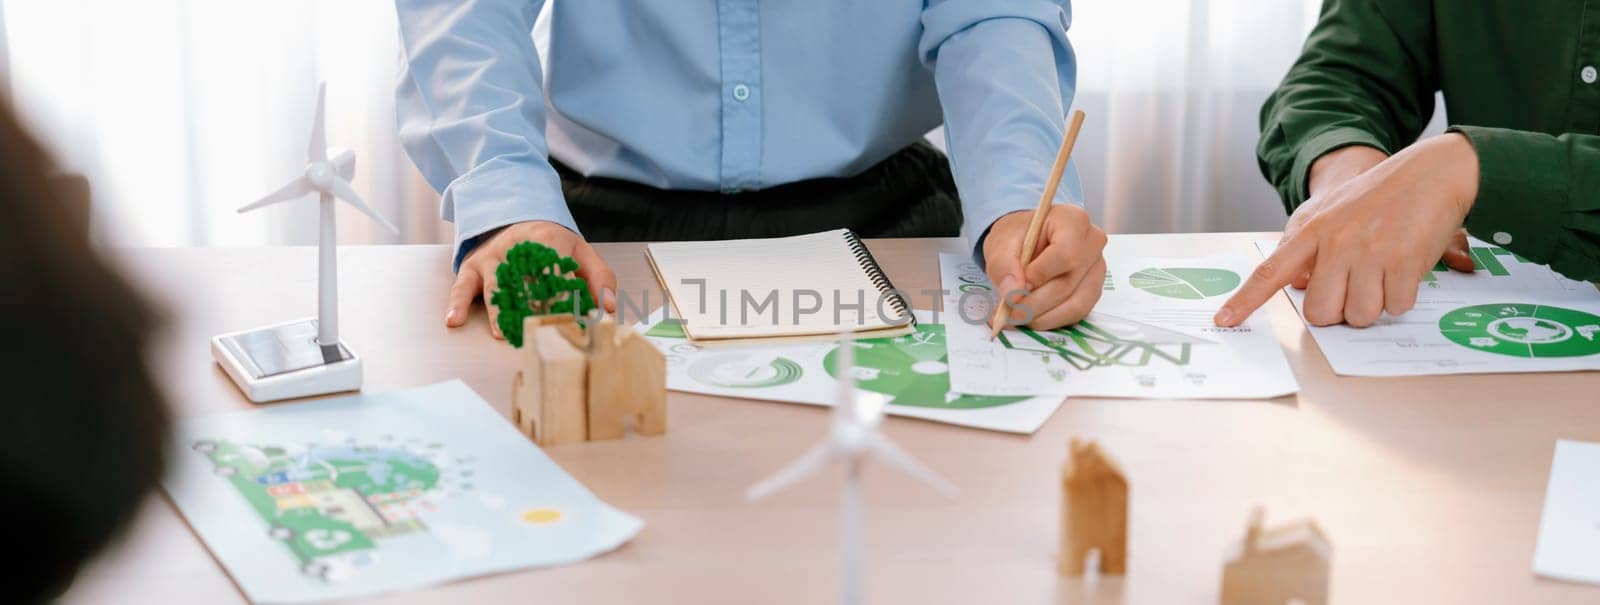 Business people invest in green business plan at meeting room on table with house model and wind mill placed represented eco house and renewable energy. Closeup. Delineation.